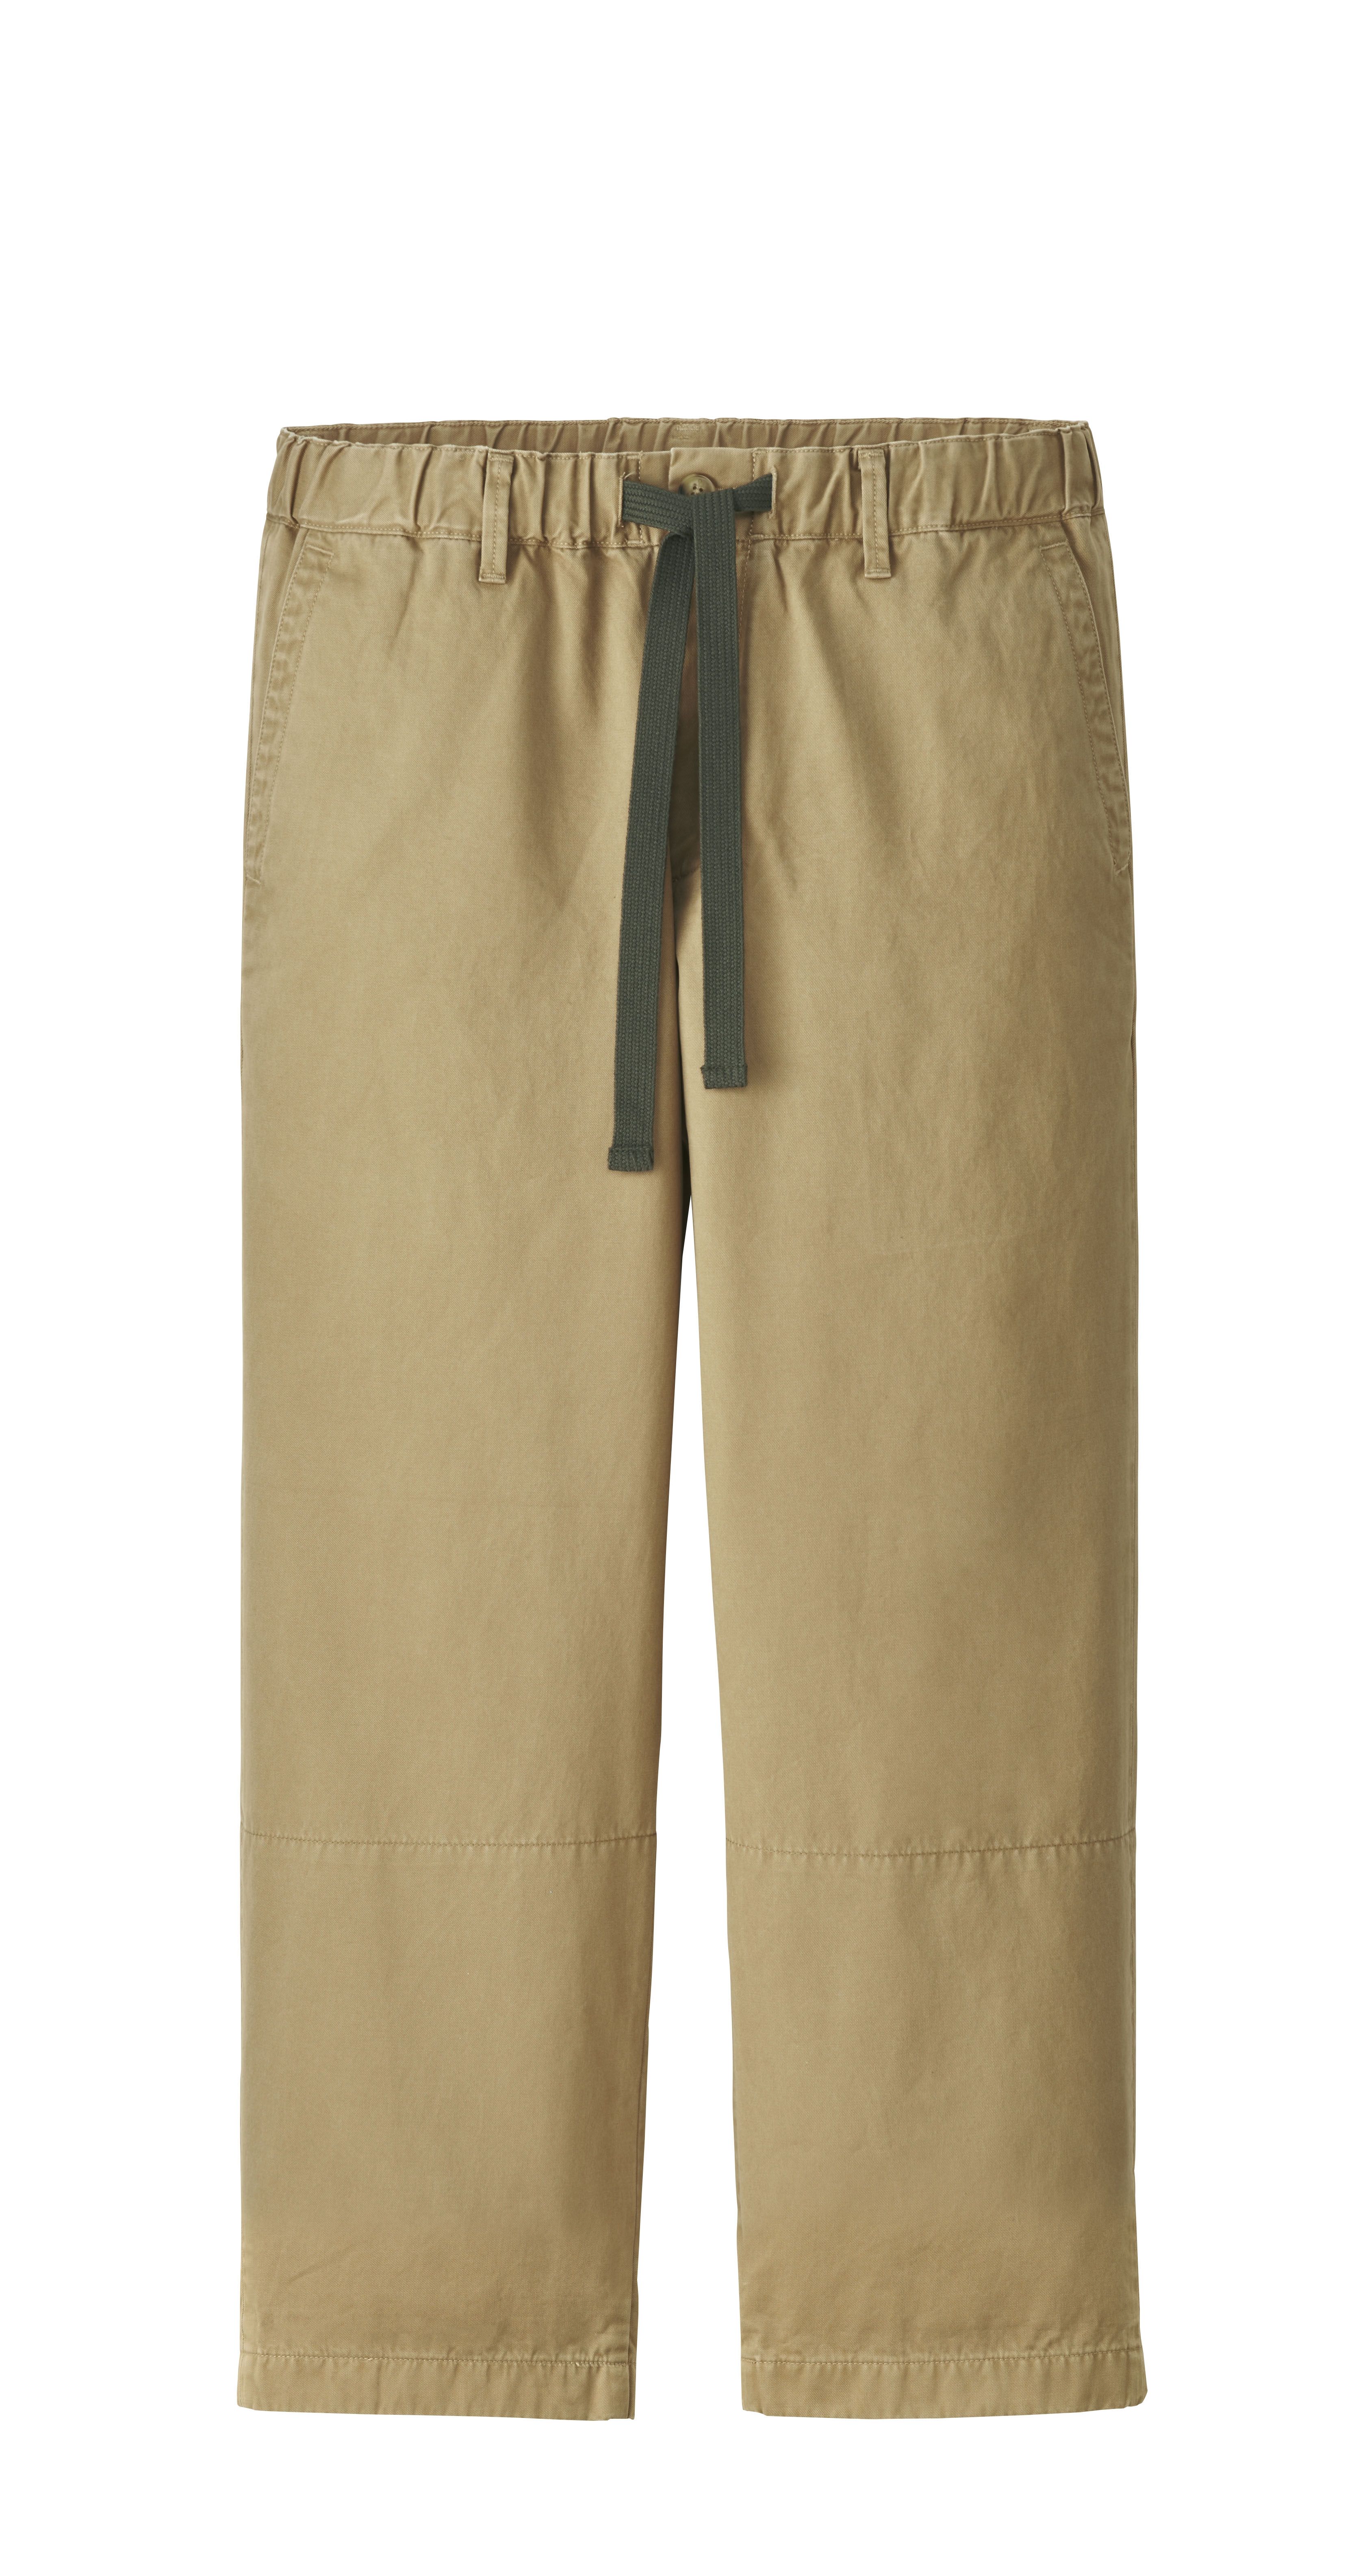 JW Anderson x Uniqlo Nylon Active Cargos Mens Fashion Bottoms Trousers  on Carousell